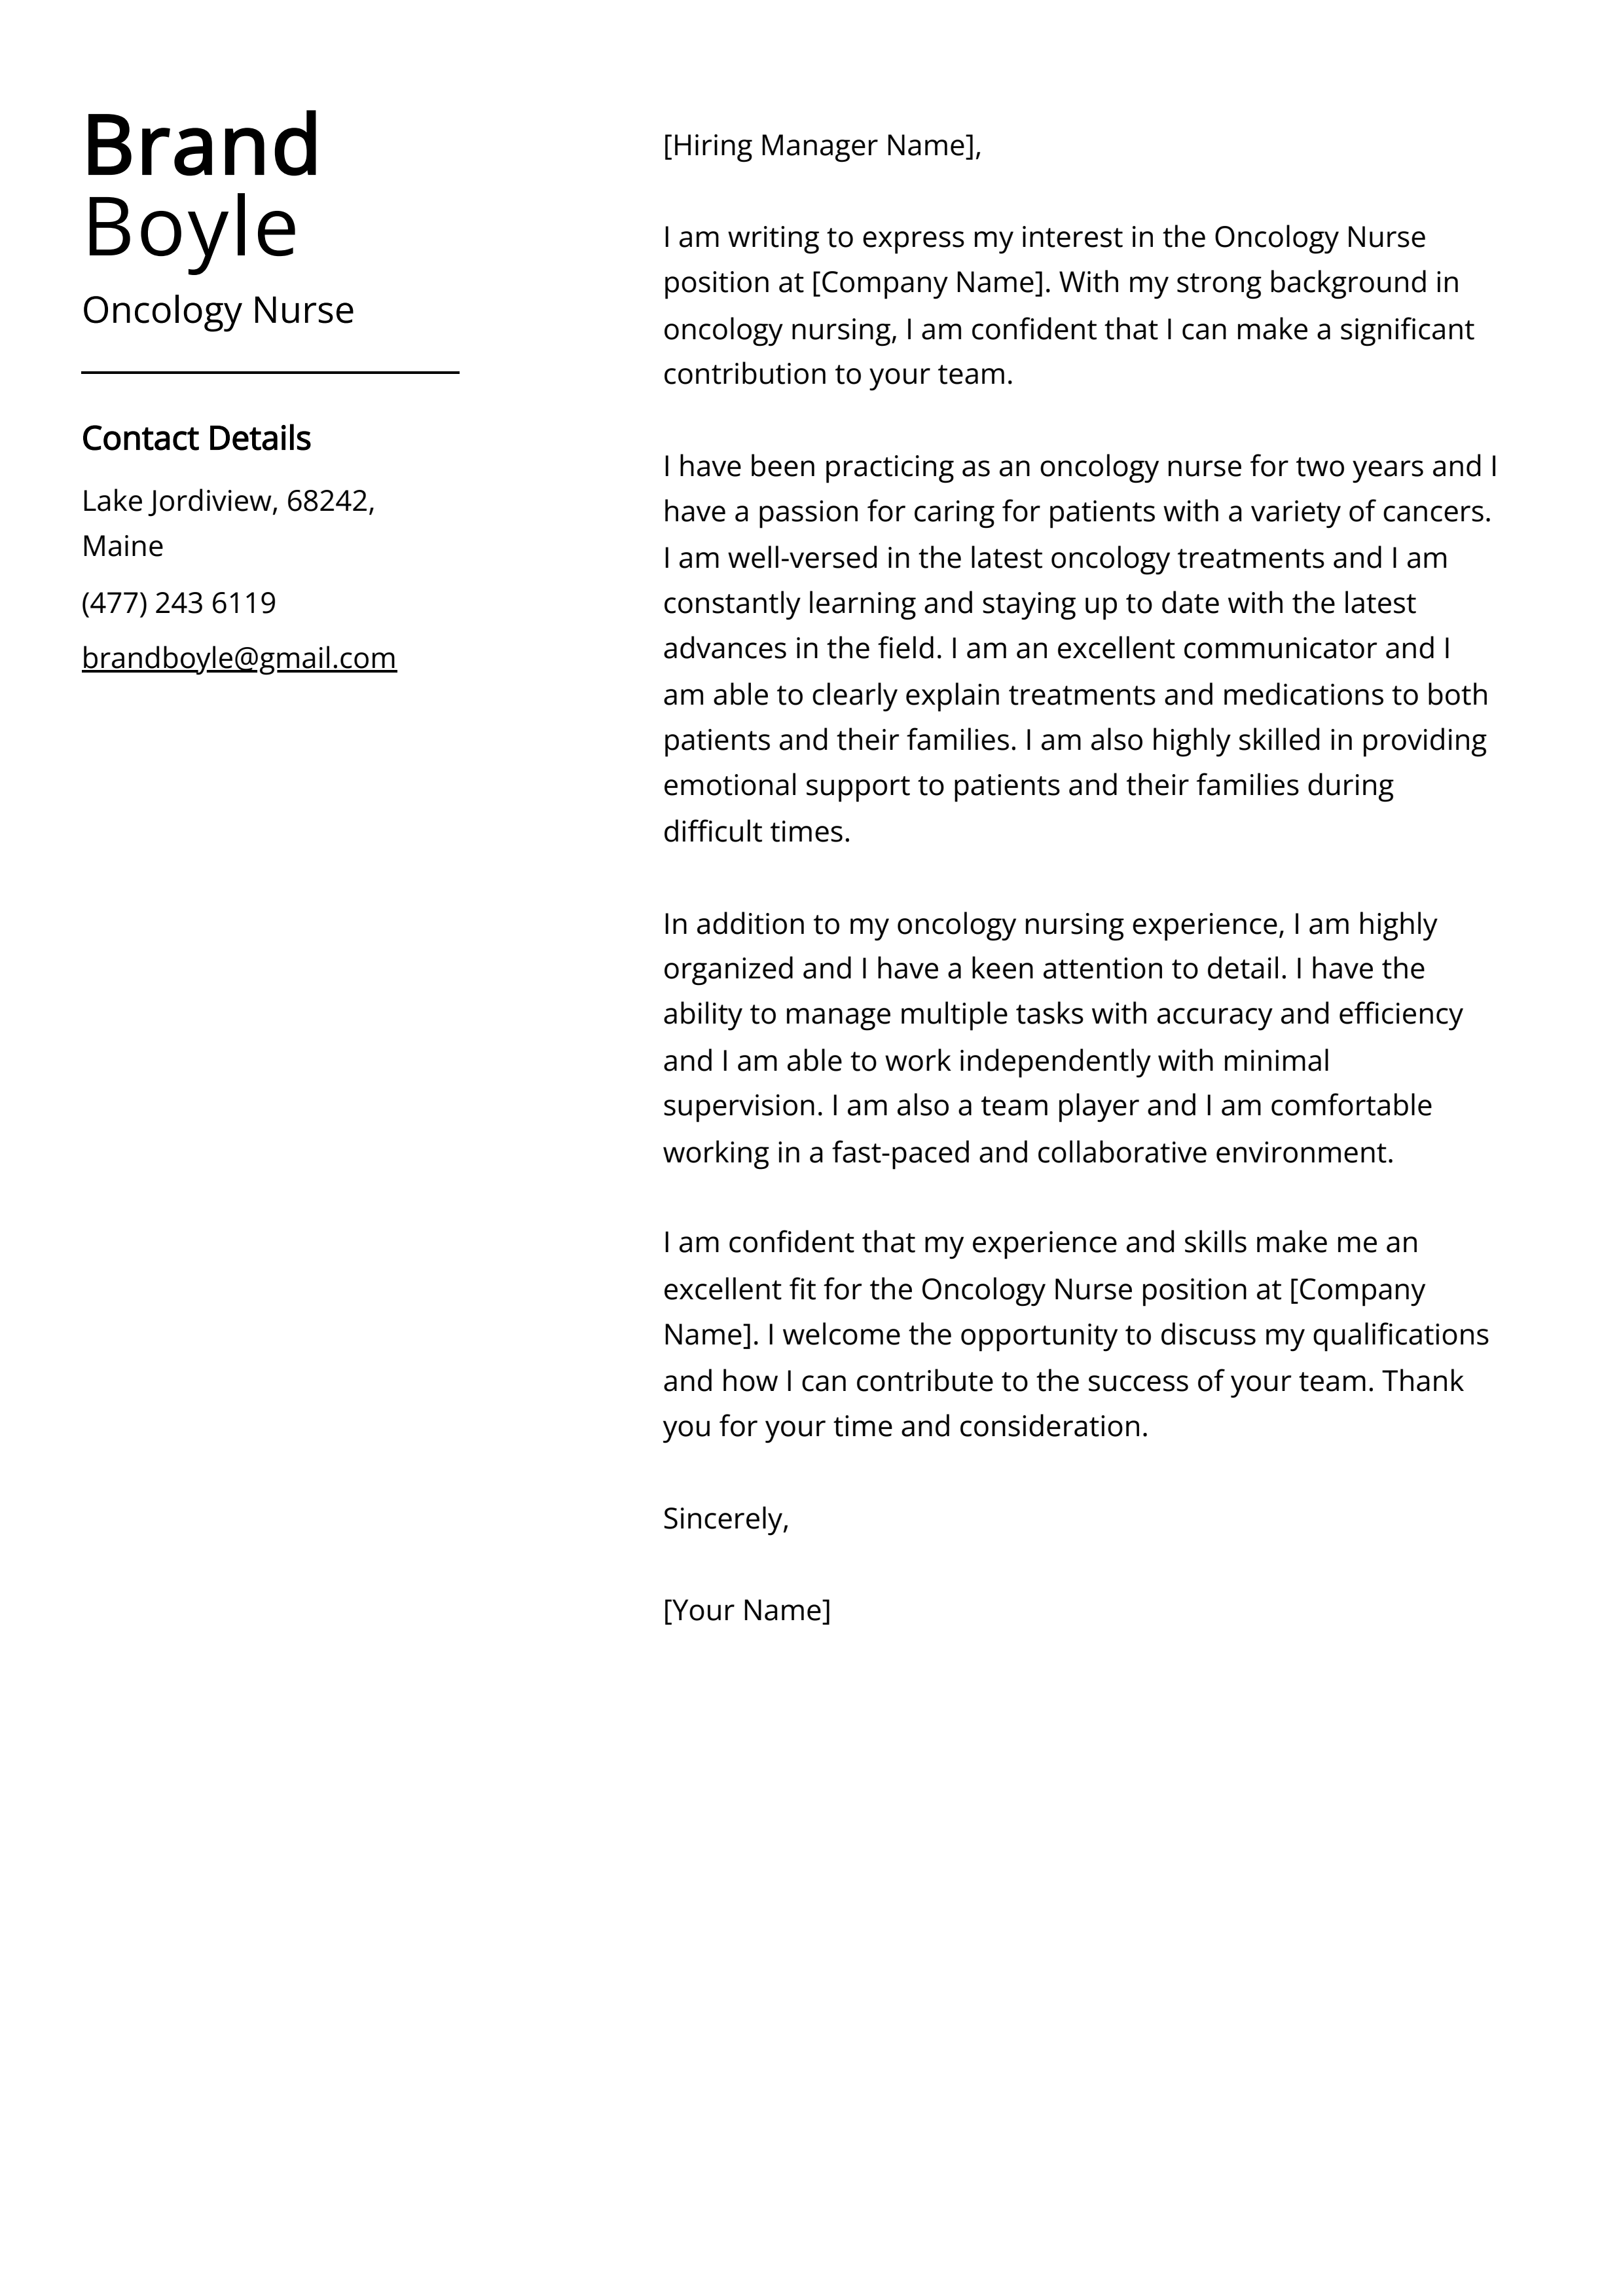 Oncology Nurse Cover Letter Example